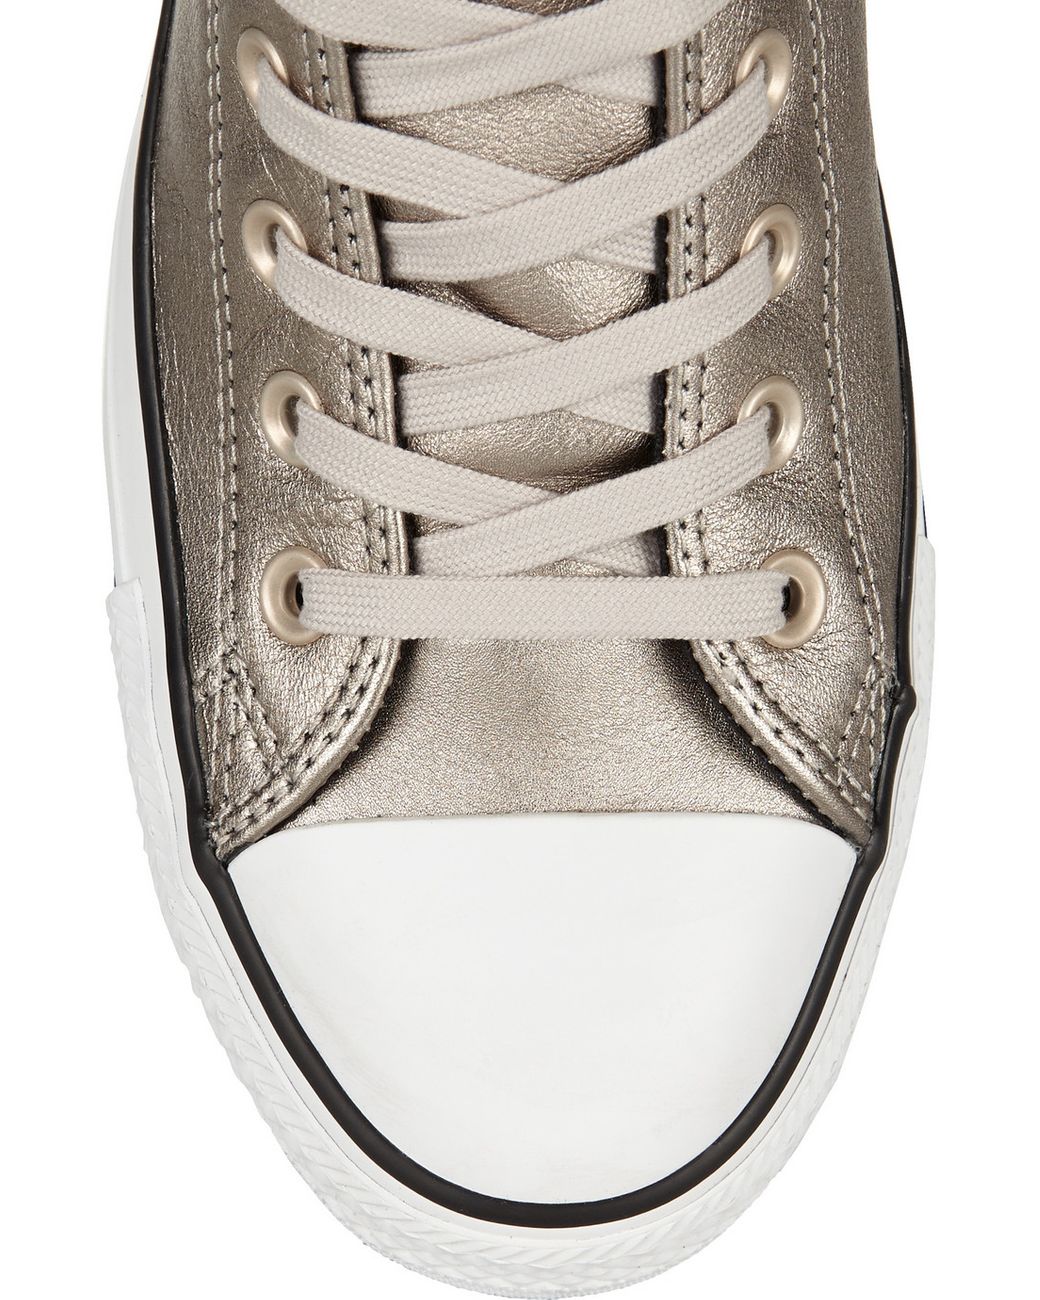 Converse Chuck Taylor All Star Tri Zip Leather High-Top Sneakers in Silver  (Metallic) | Lyst